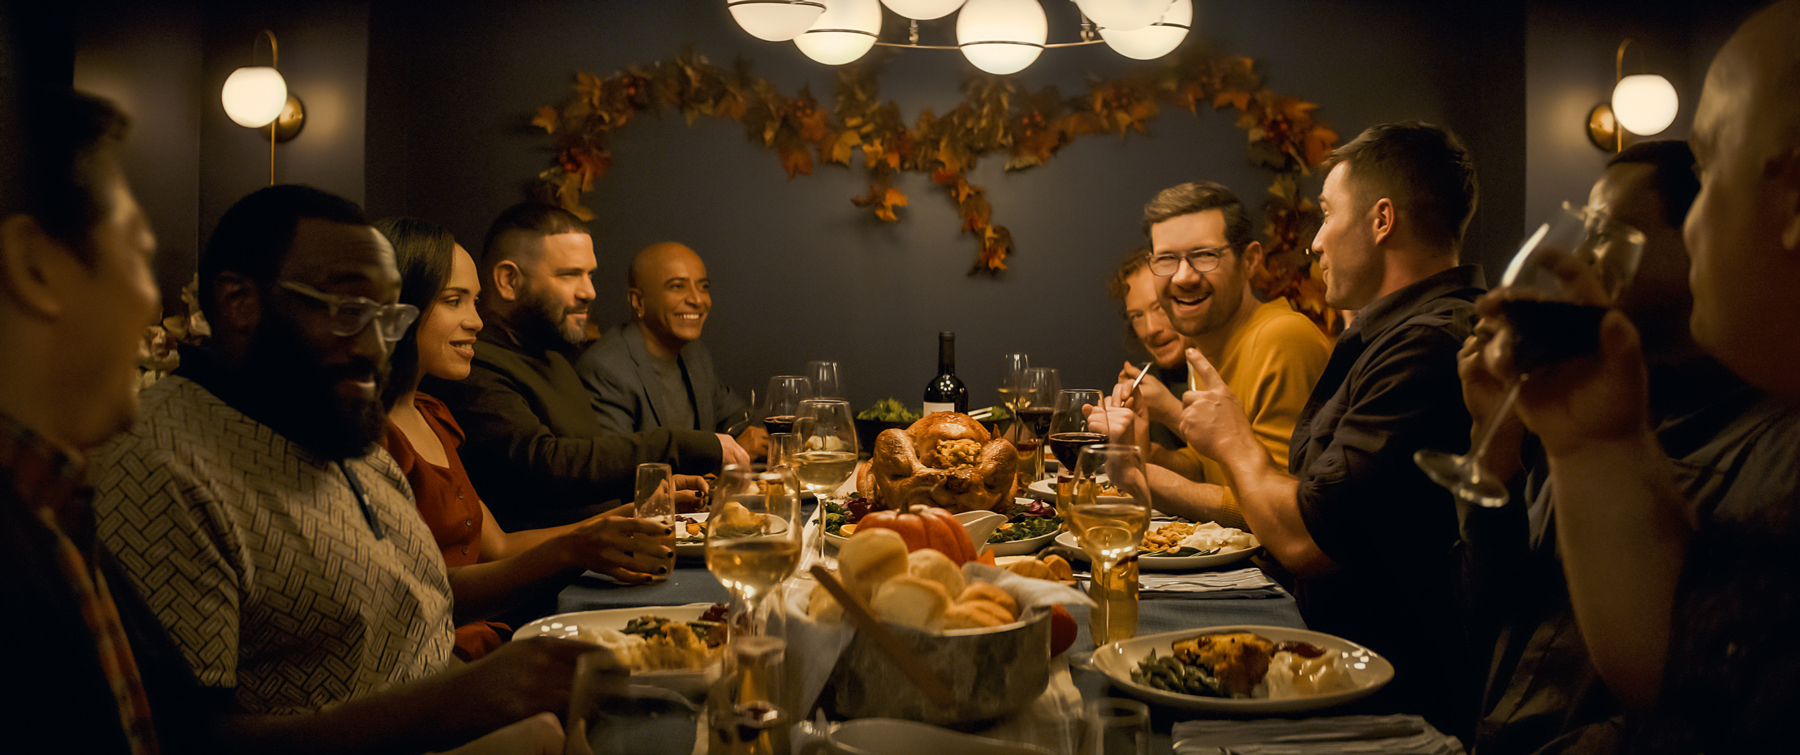 (from left) Peter (Peter Kim), Paul (Justin Covington), Tina (Monica Raymund), Edgar (Guillermo Díaz), Tom (D’Lo), Lucas (Becca Blackwell), Bobby (Billy Eichner), Aaron (Luke Macfarlane), Marty (Symone) and Henry (Guy Branum) in Bros, directed by Nicholas Stoller.